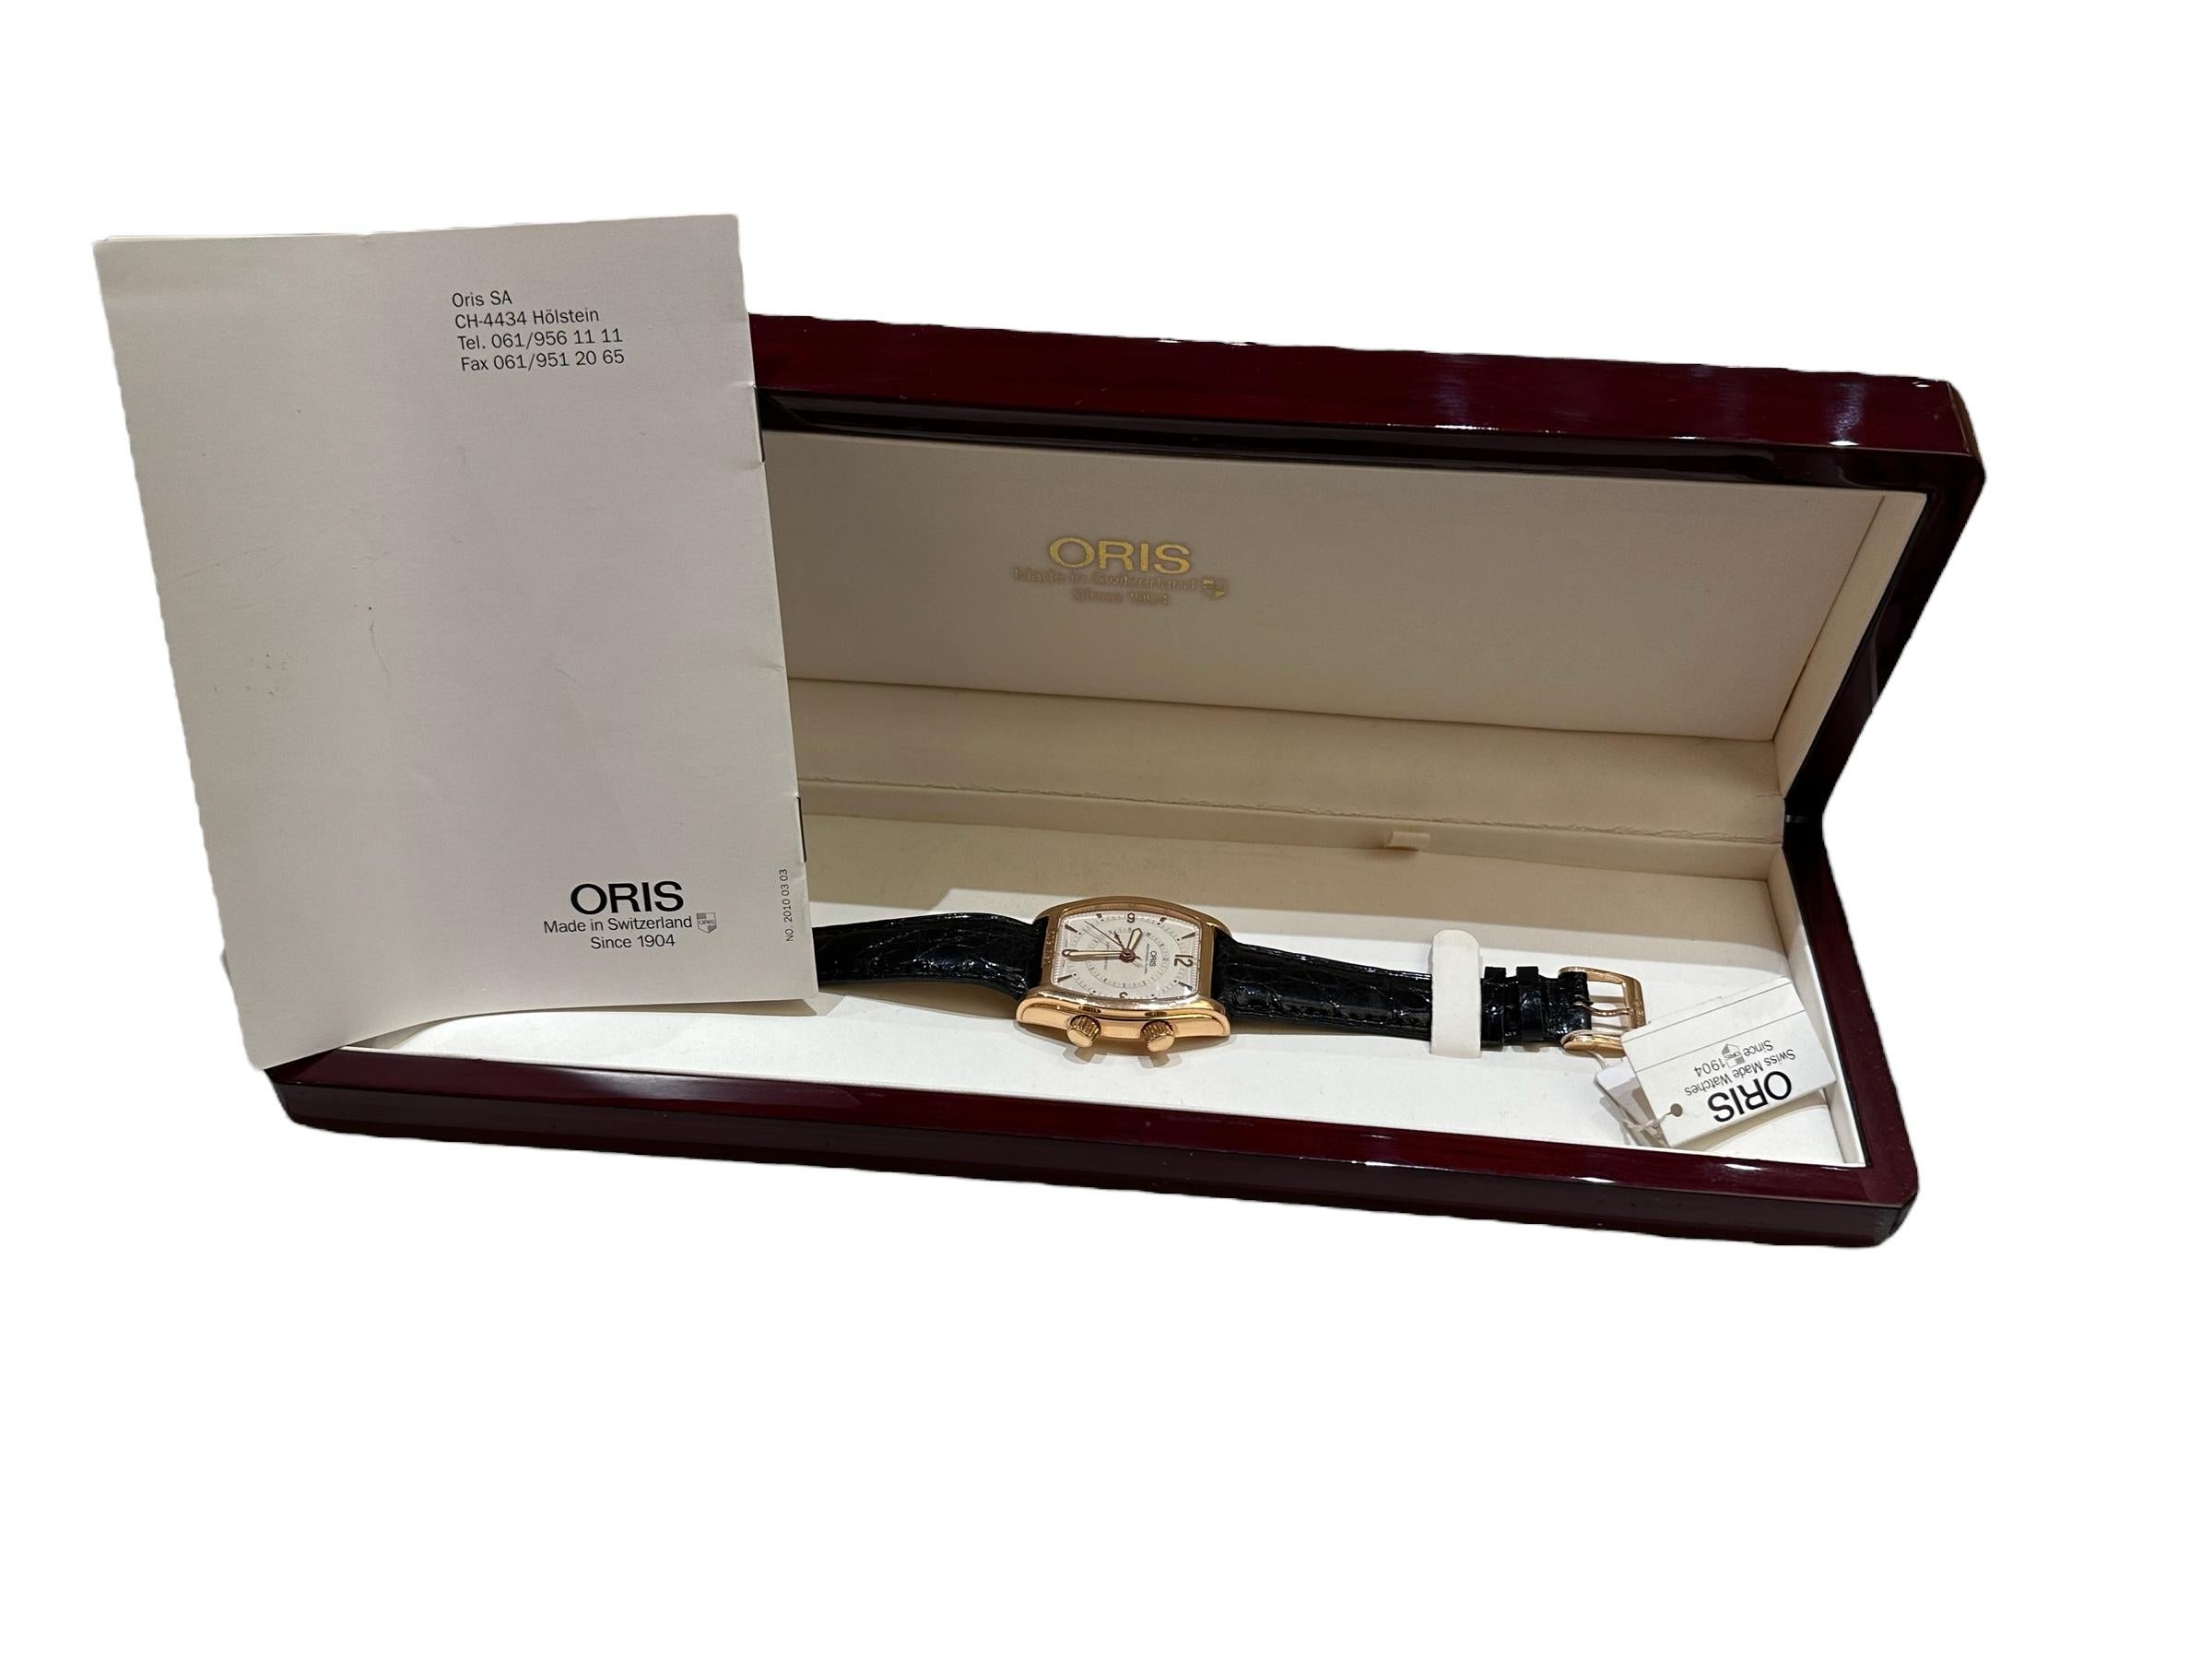 Oris Reveil Limited Edition Mechanical Alarm 18kt Gold, New with Box & Papers For Sale 9